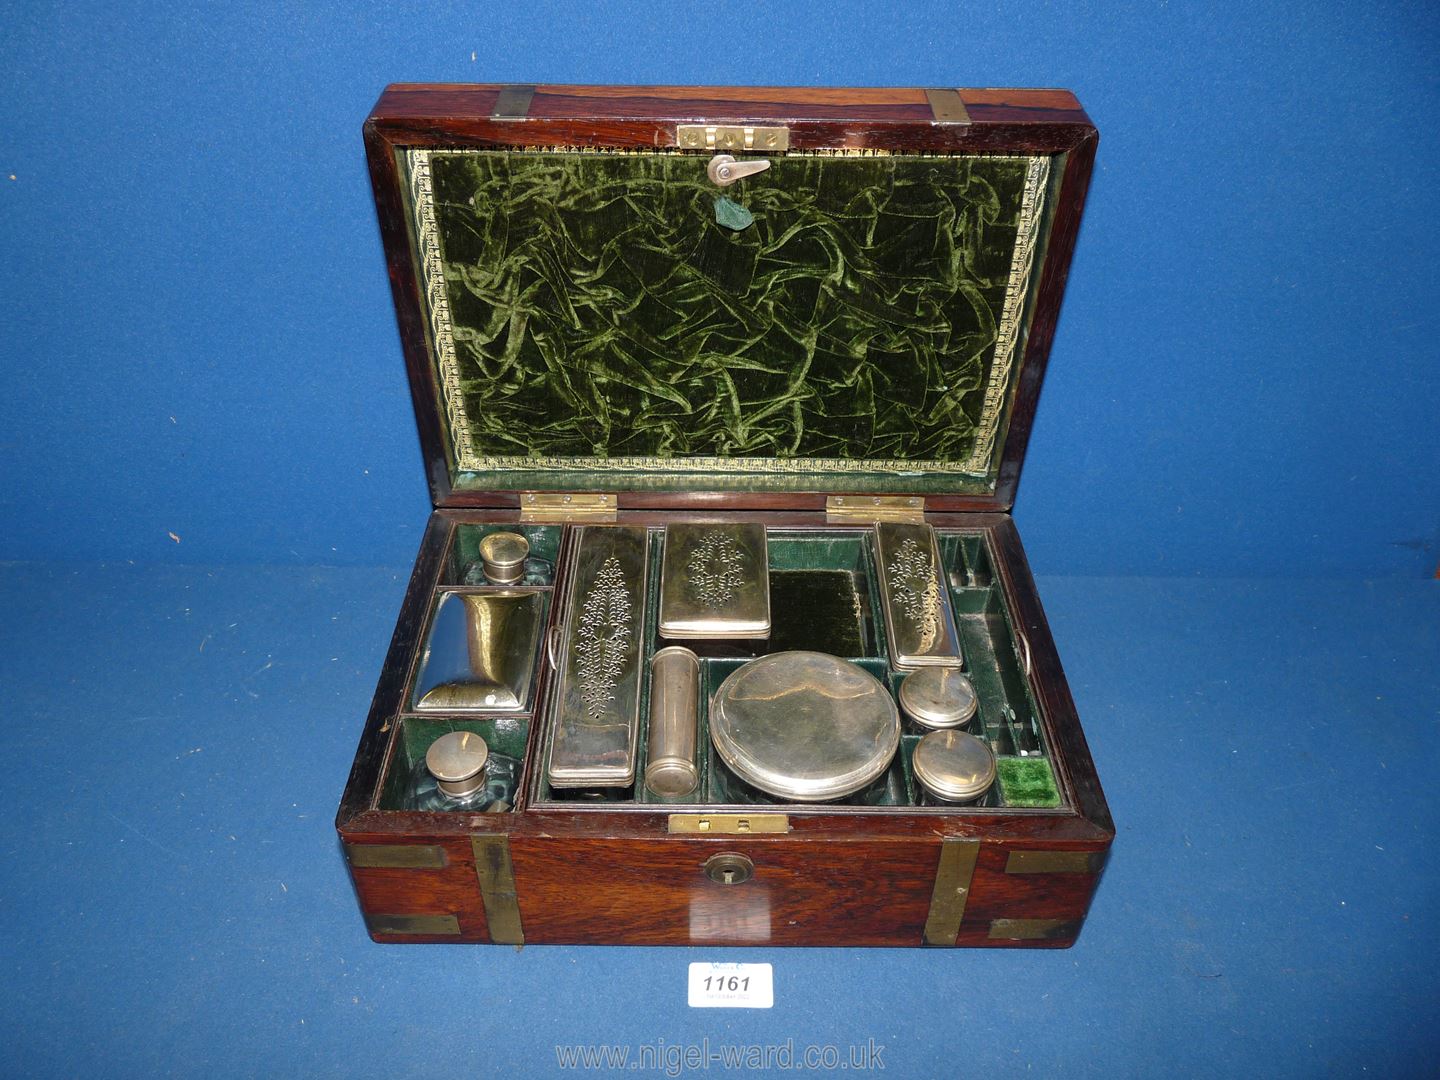 A brass bound Rosewood/Walnut cased gentleman's travelling Grooming set including glass toothpick